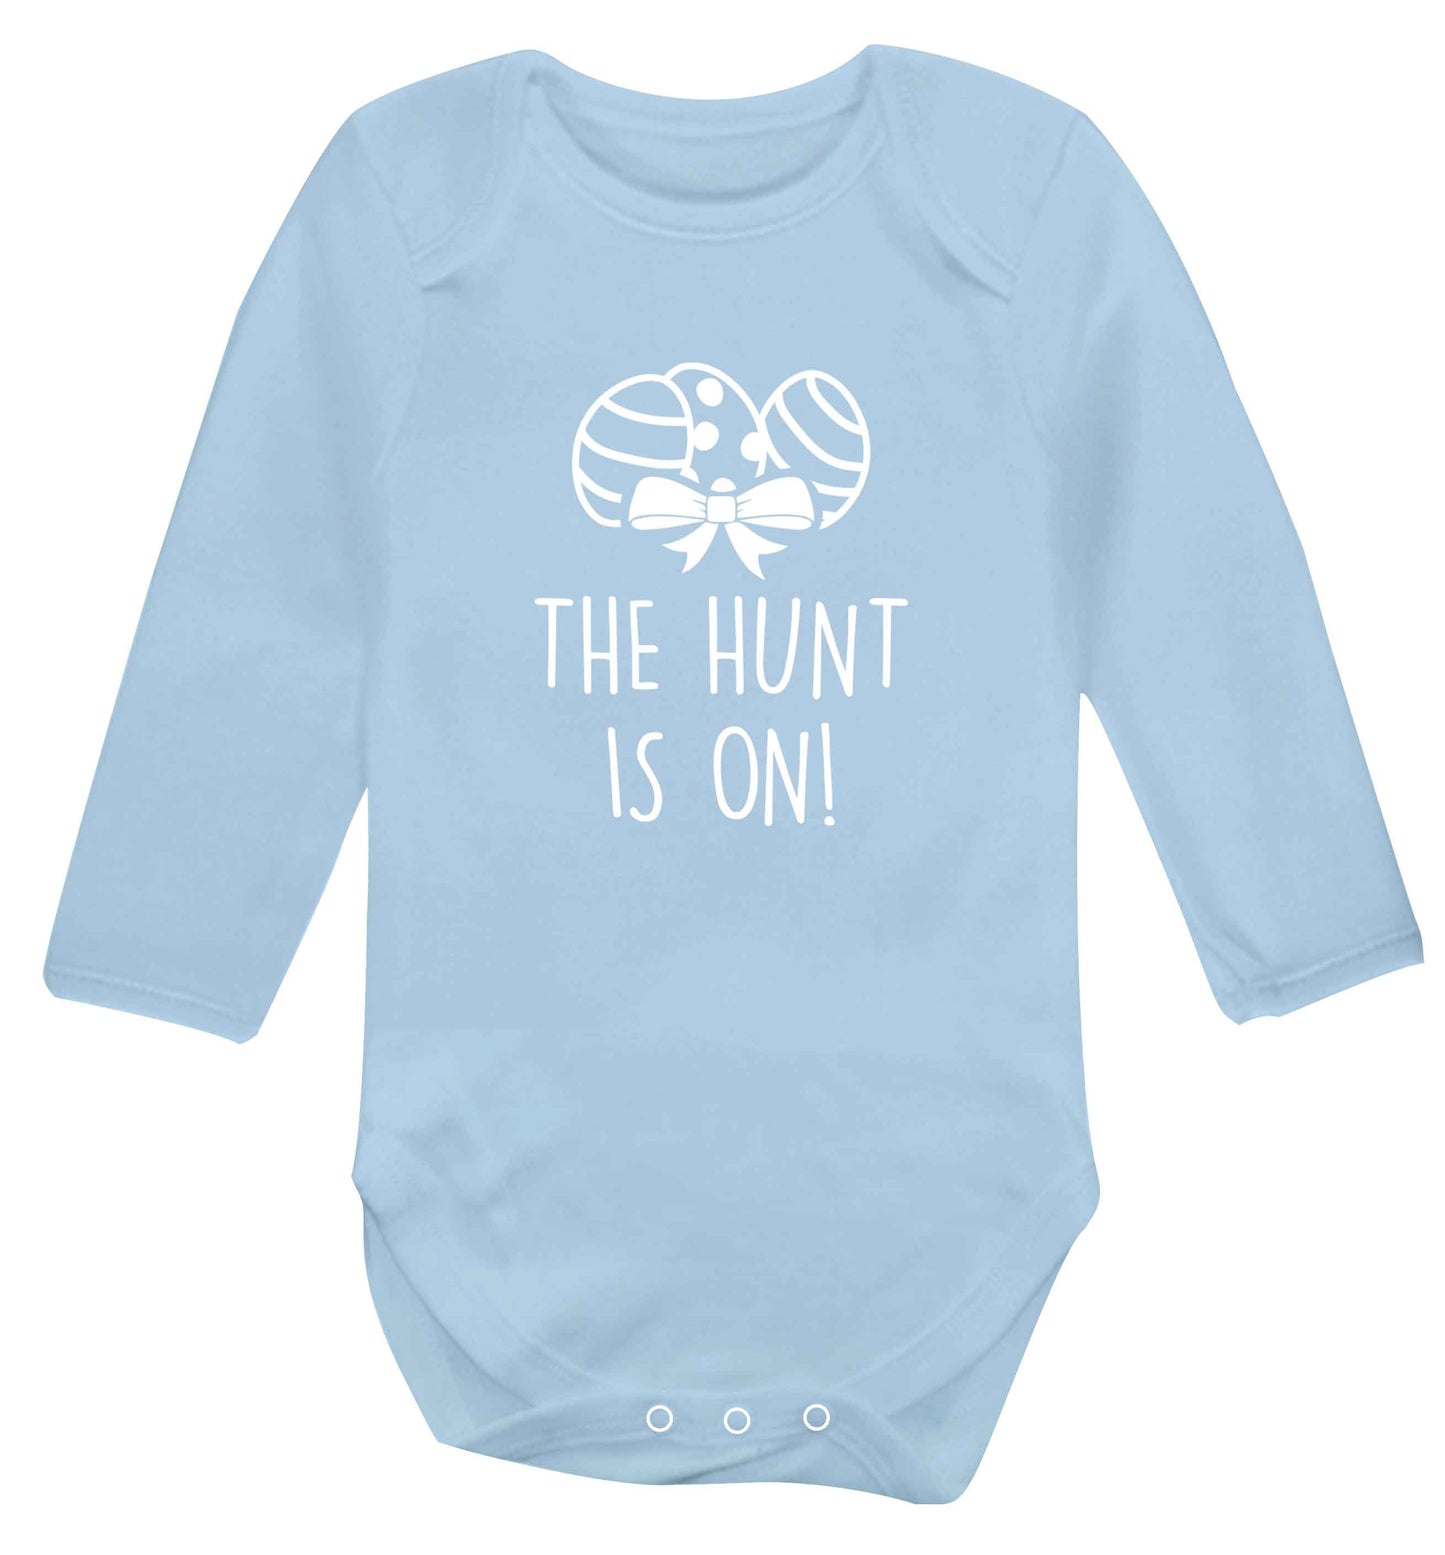 The hunt is on baby vest long sleeved pale blue 6-12 months